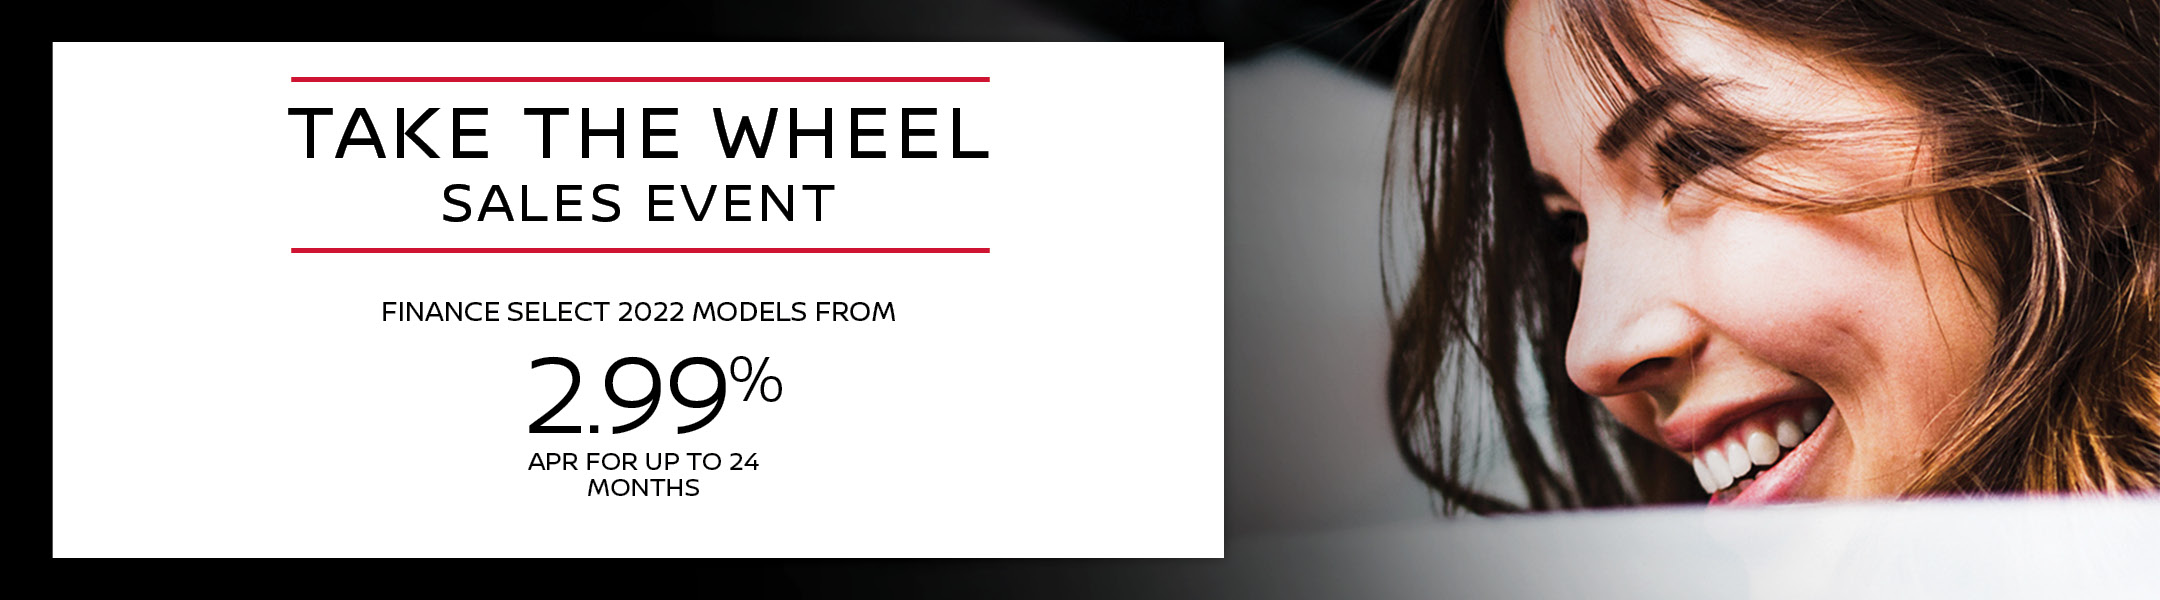 Take the wheel Sales Event at Nissan Downtown in Toronto, ON